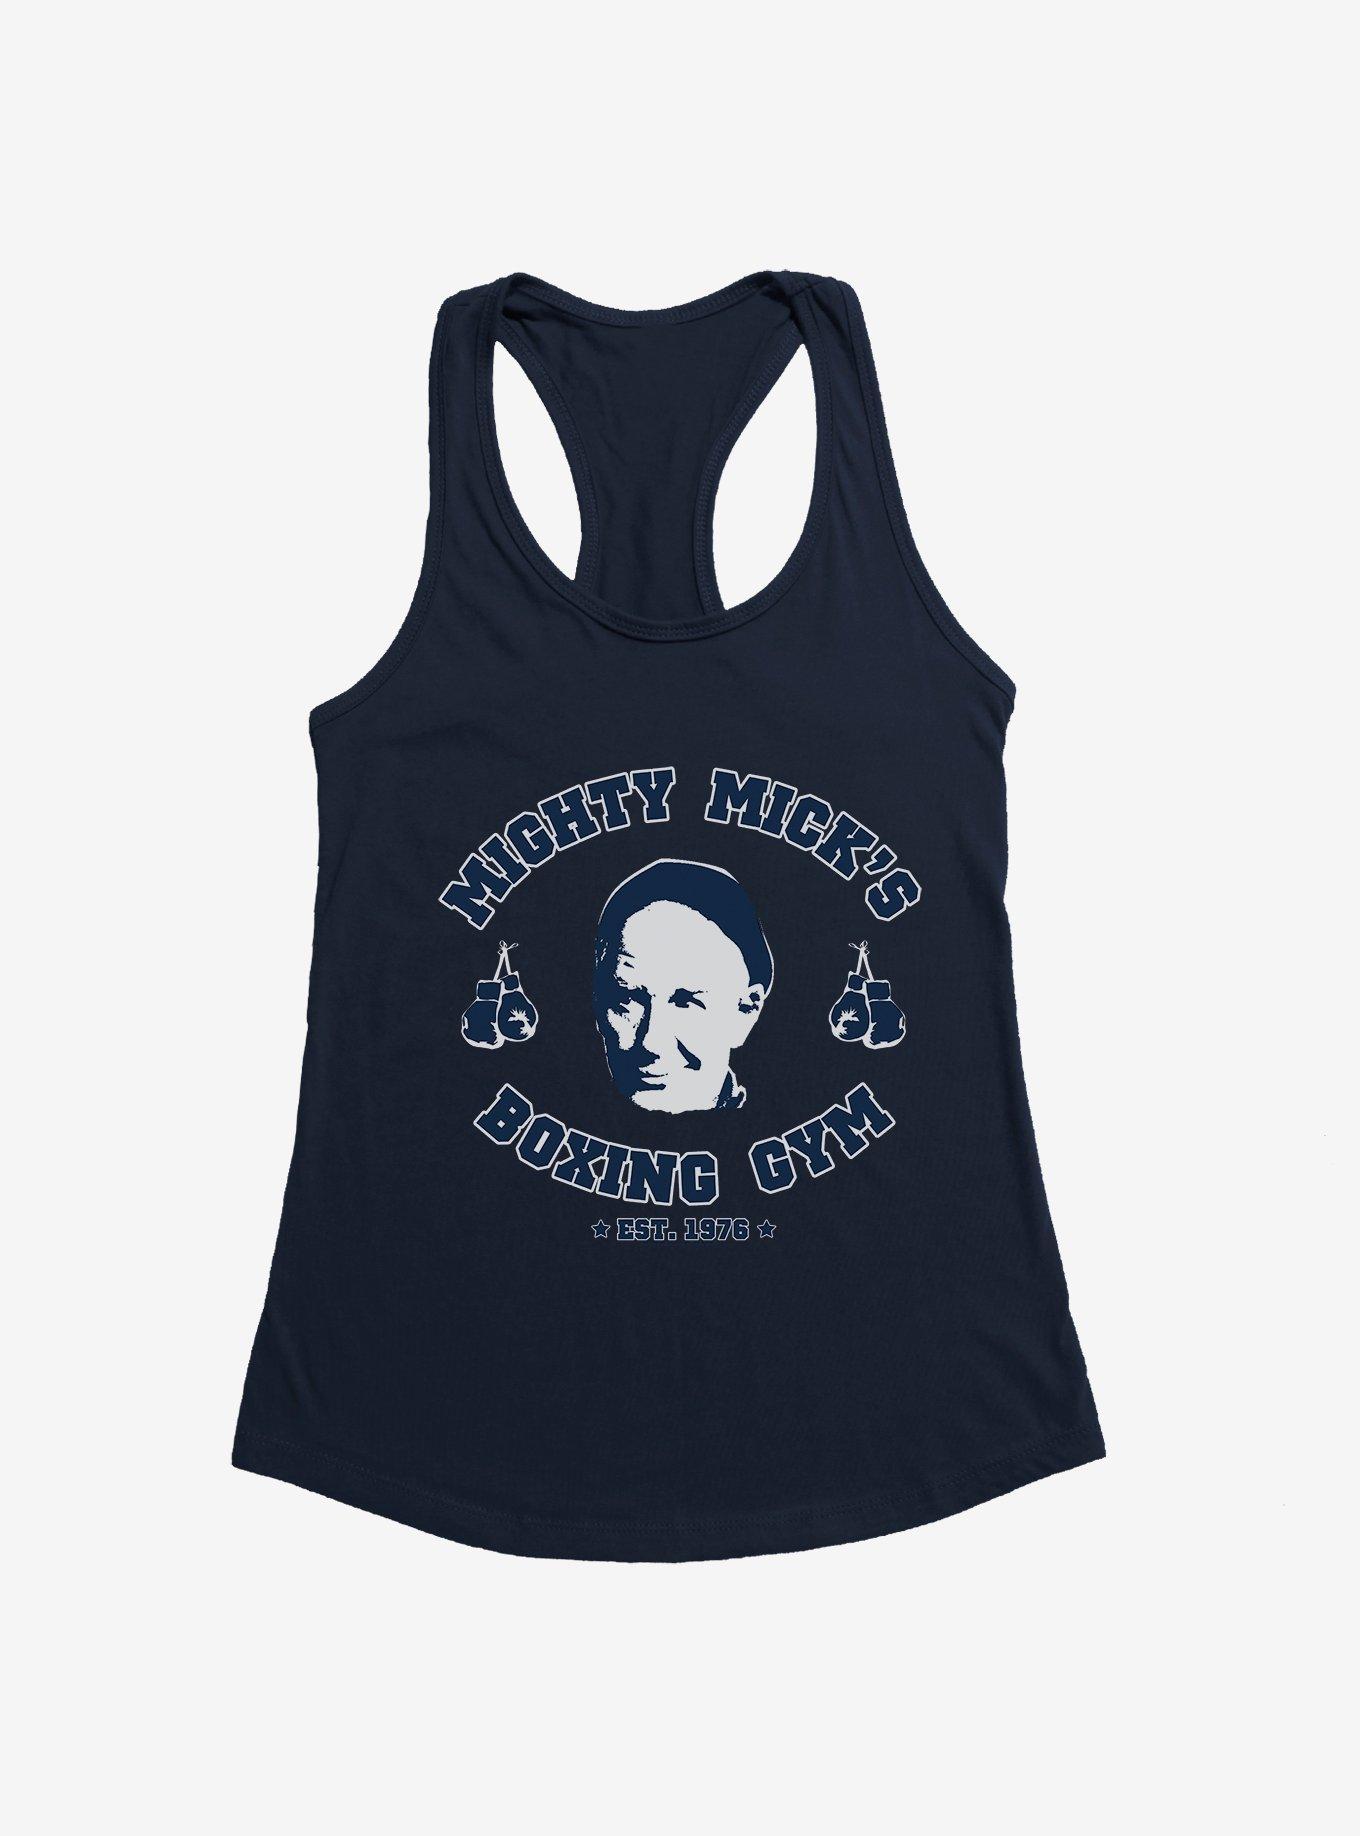 Rocky Mighty Mick's Boxing Gym Girls Tank